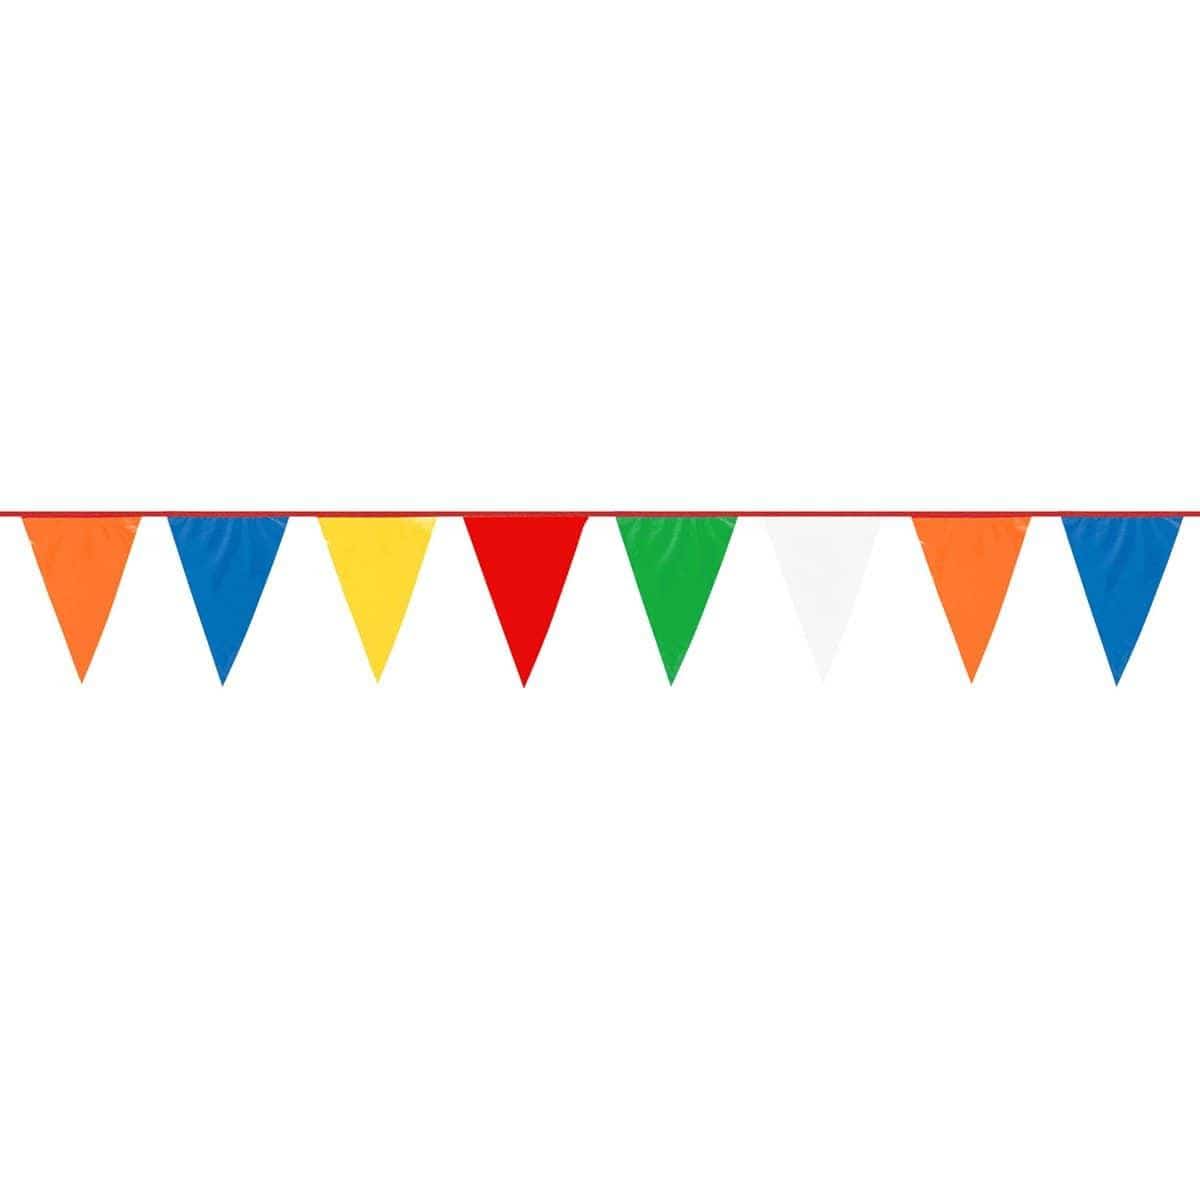 Buy Decorations Multicolor Outdoor Pennant Banners 120 Ft. X 18 In. sold at Party Expert